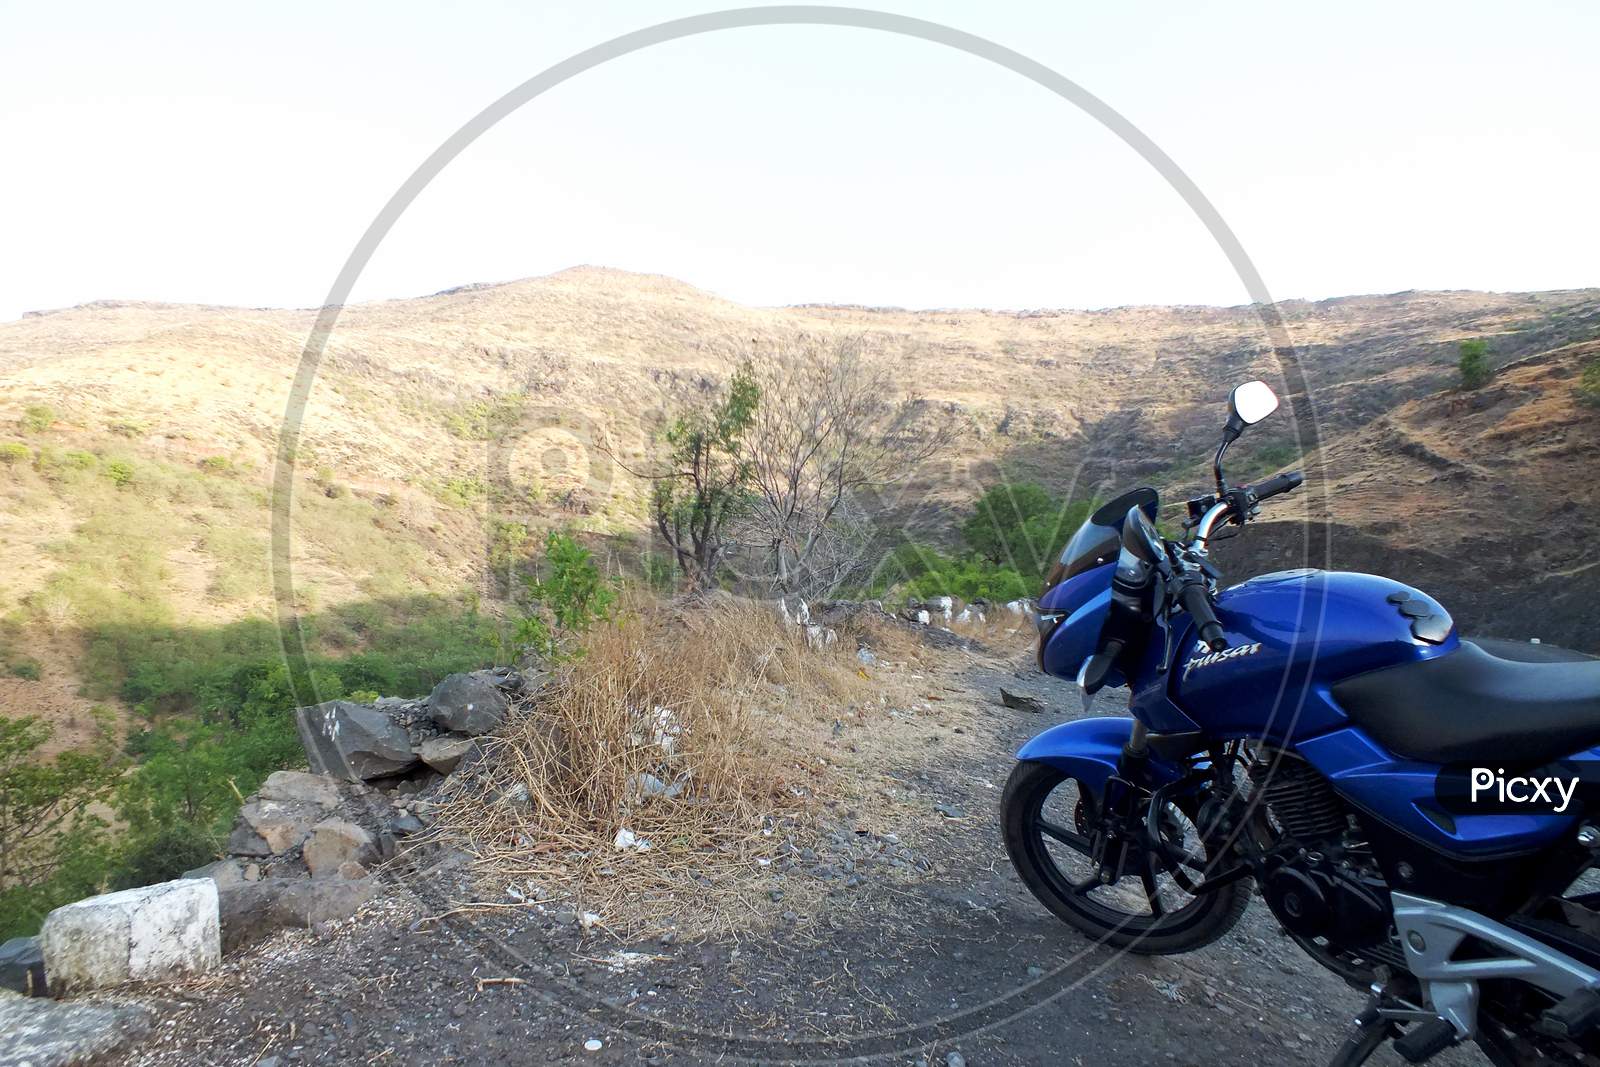 Mountains motorcycle travelling by a Pulsar